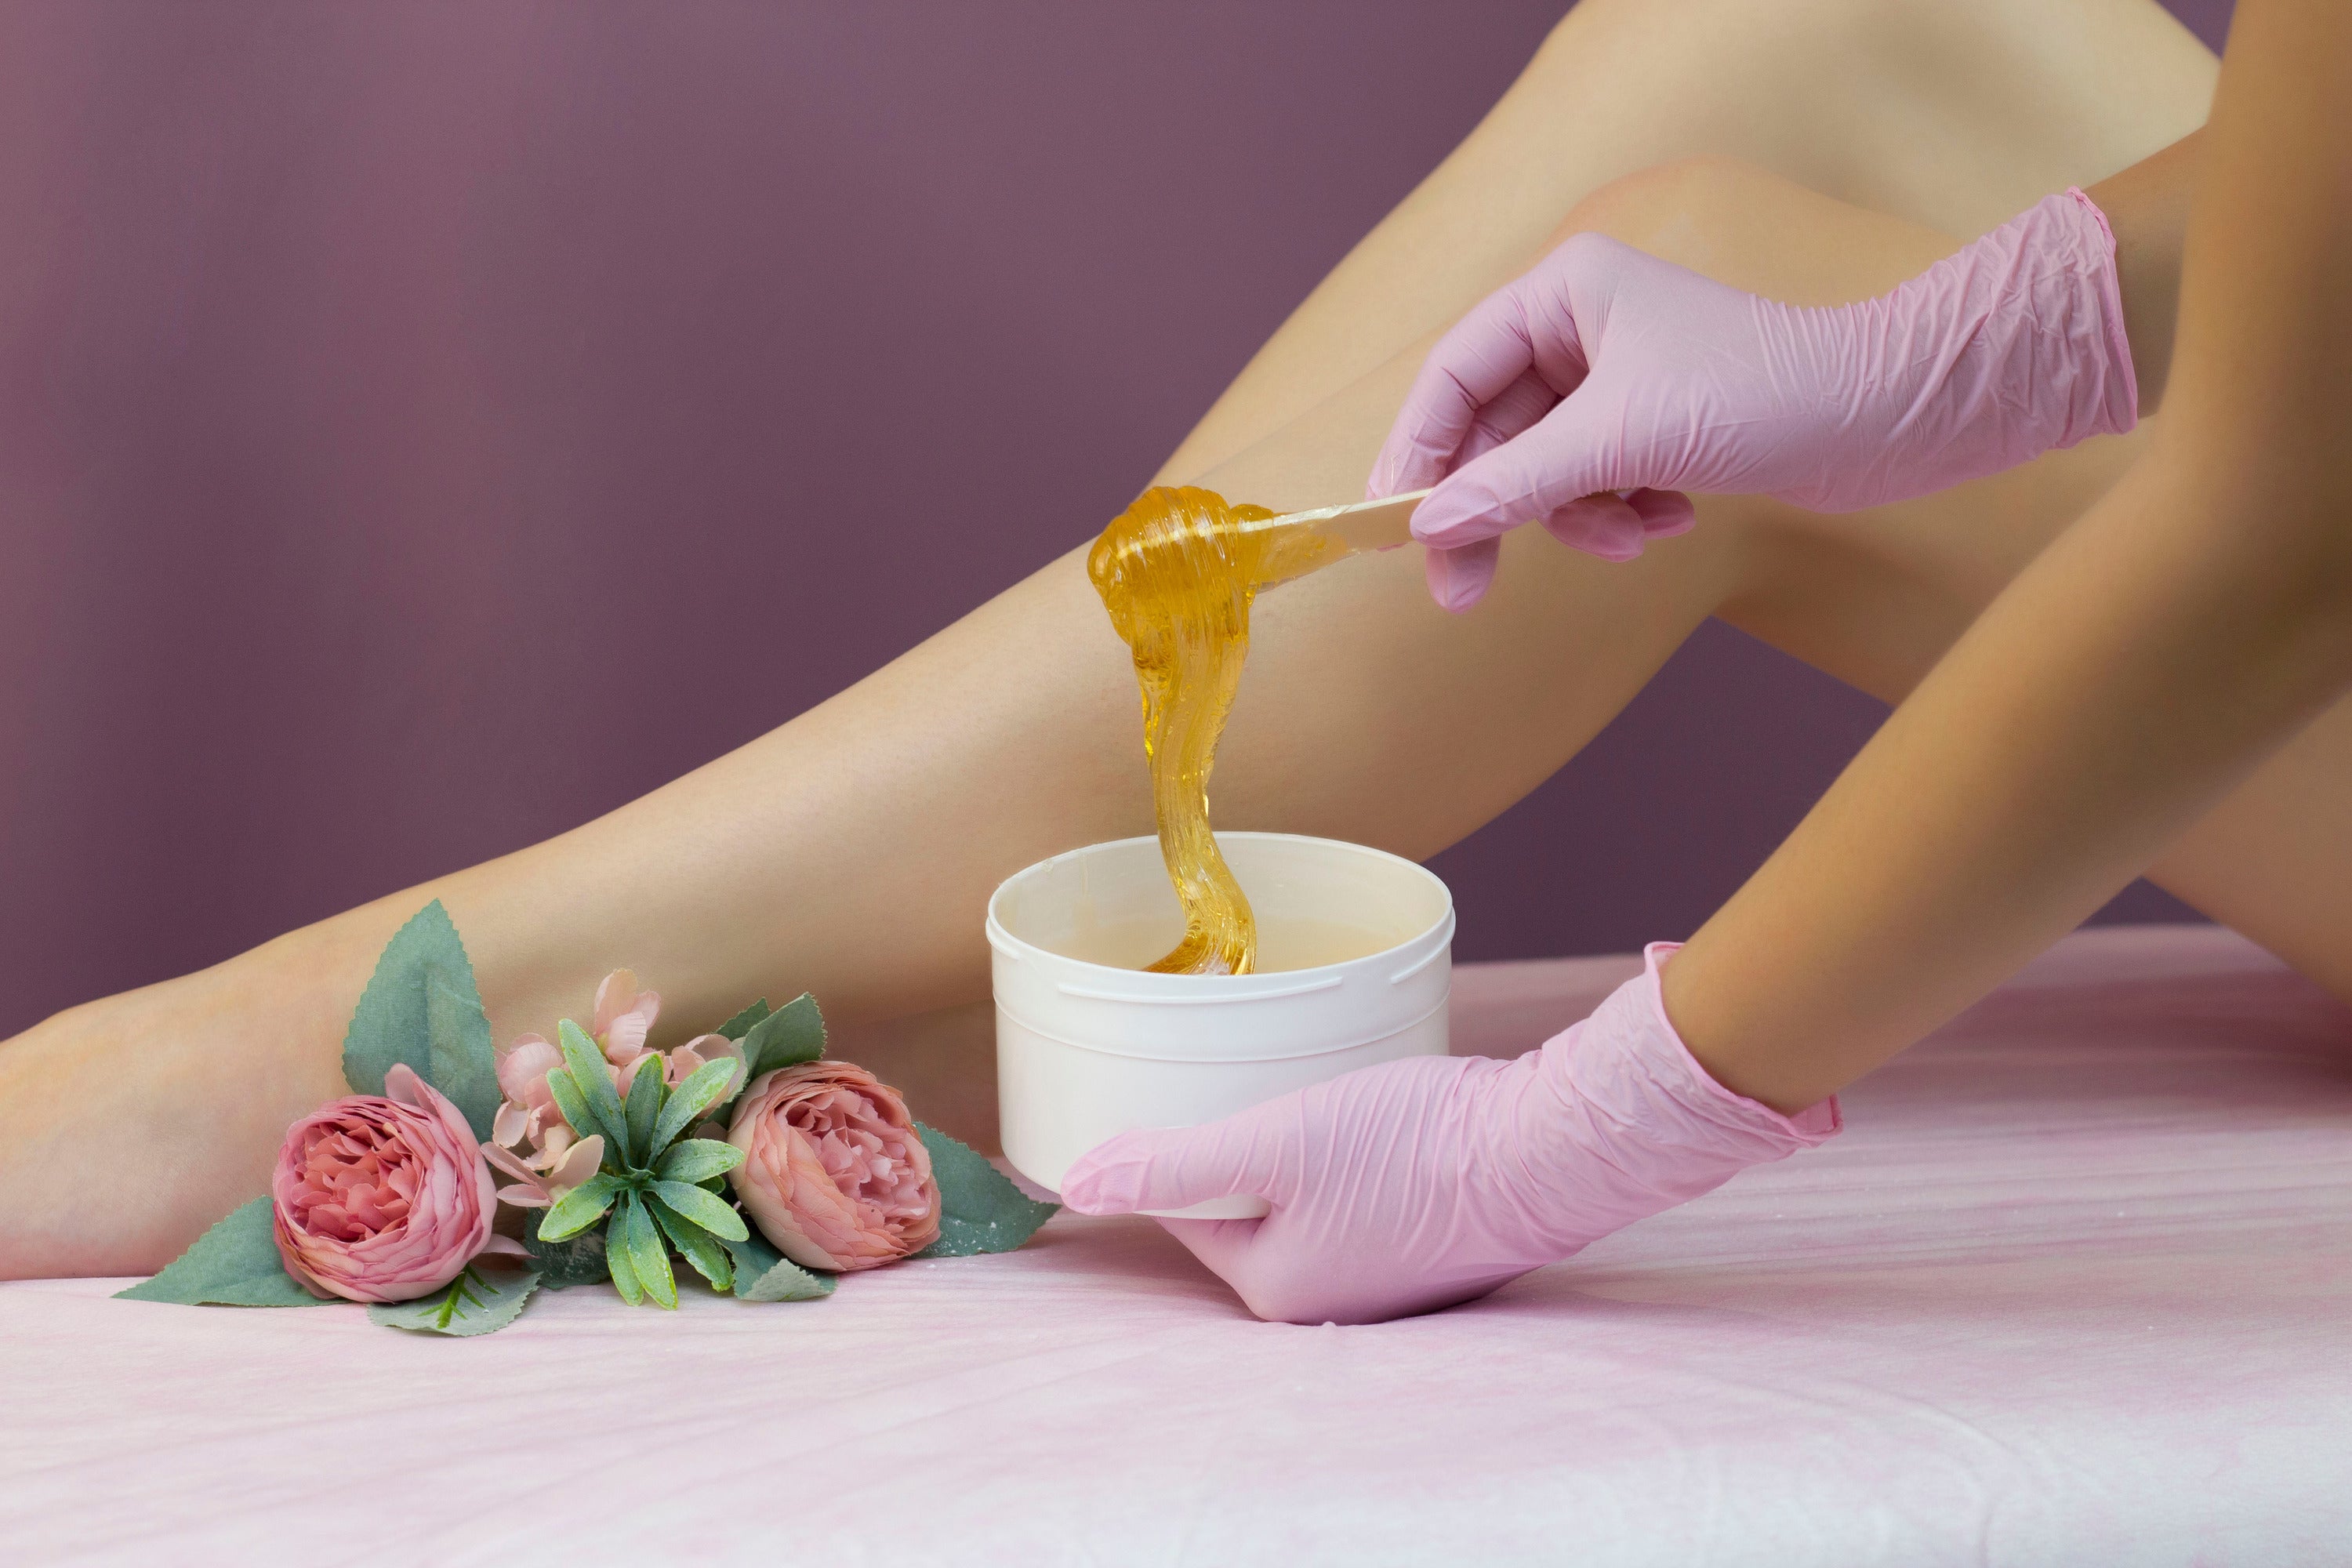 Ways that Can Brazilian Wax Pain Be Managed